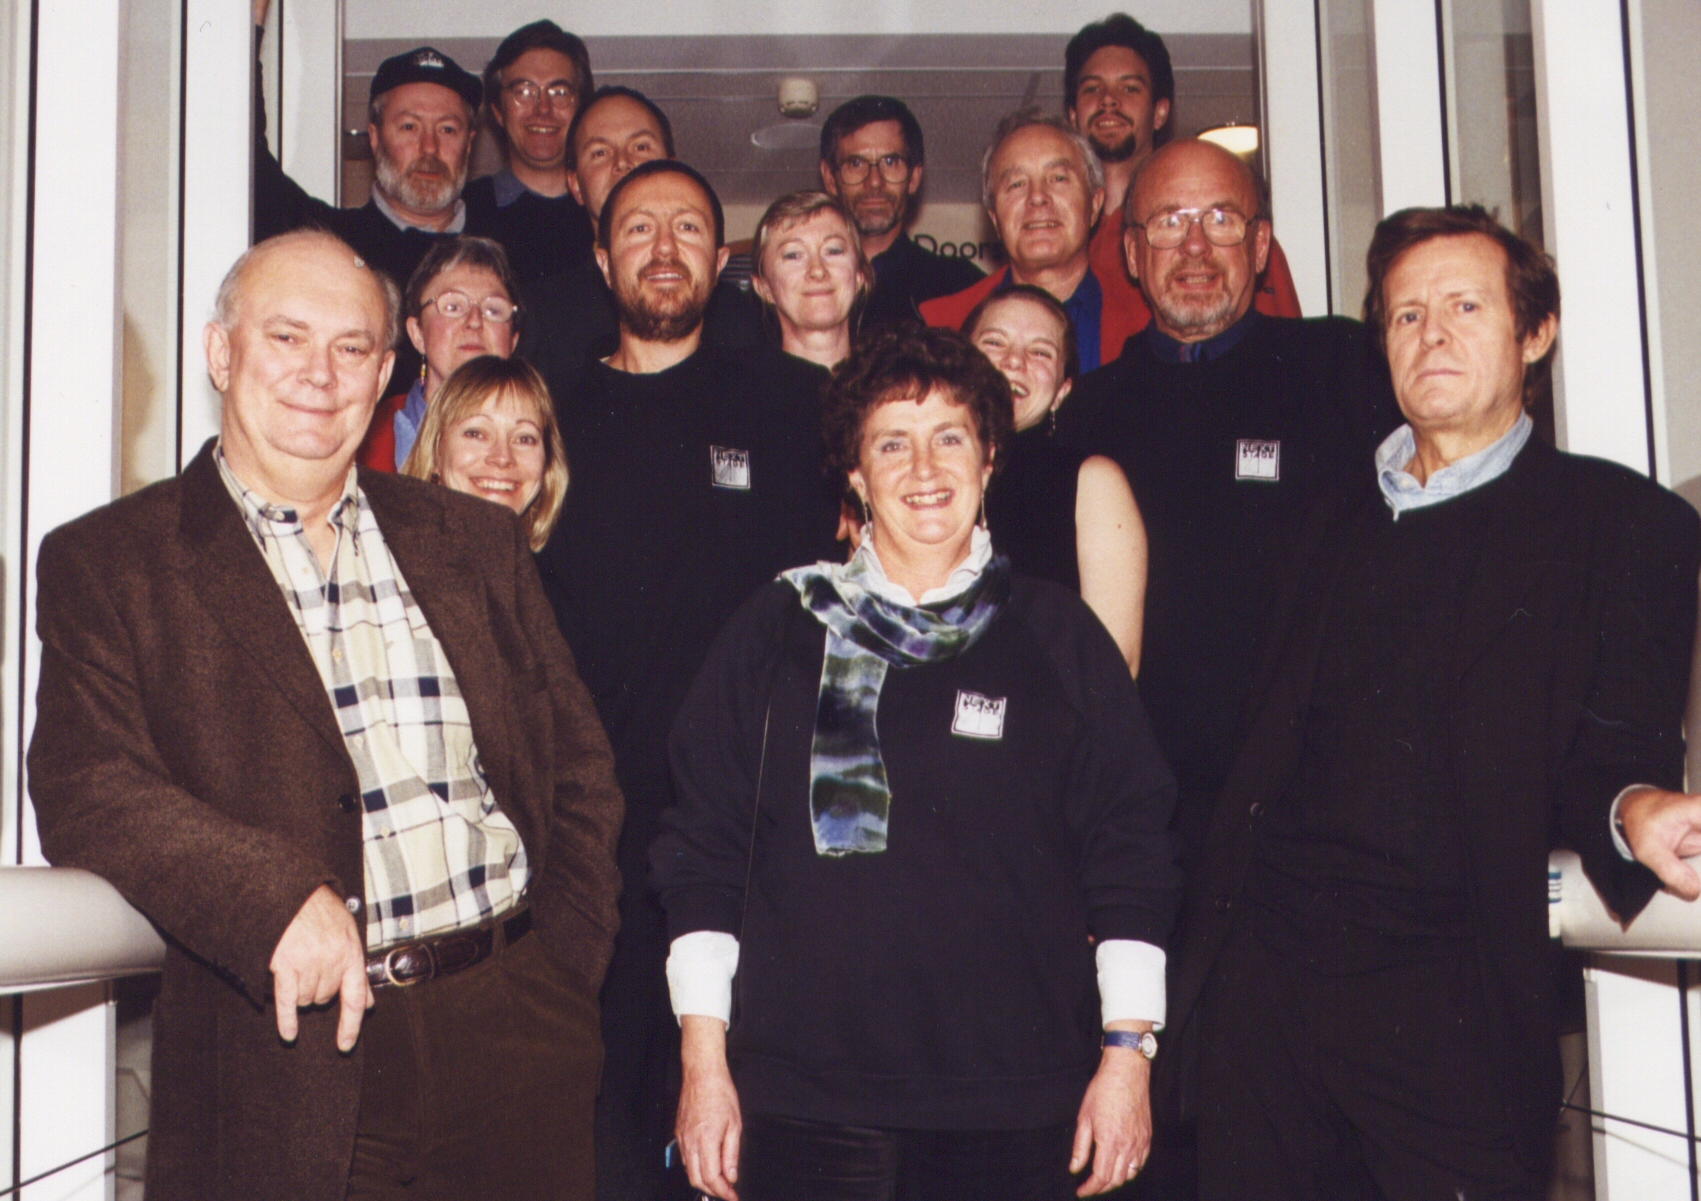 Sir David Hare and Sir Alan Ayckbourn with the cast and crew of Blue Remembered Hills, performed at the Stephen Joseph Theatre, 1998